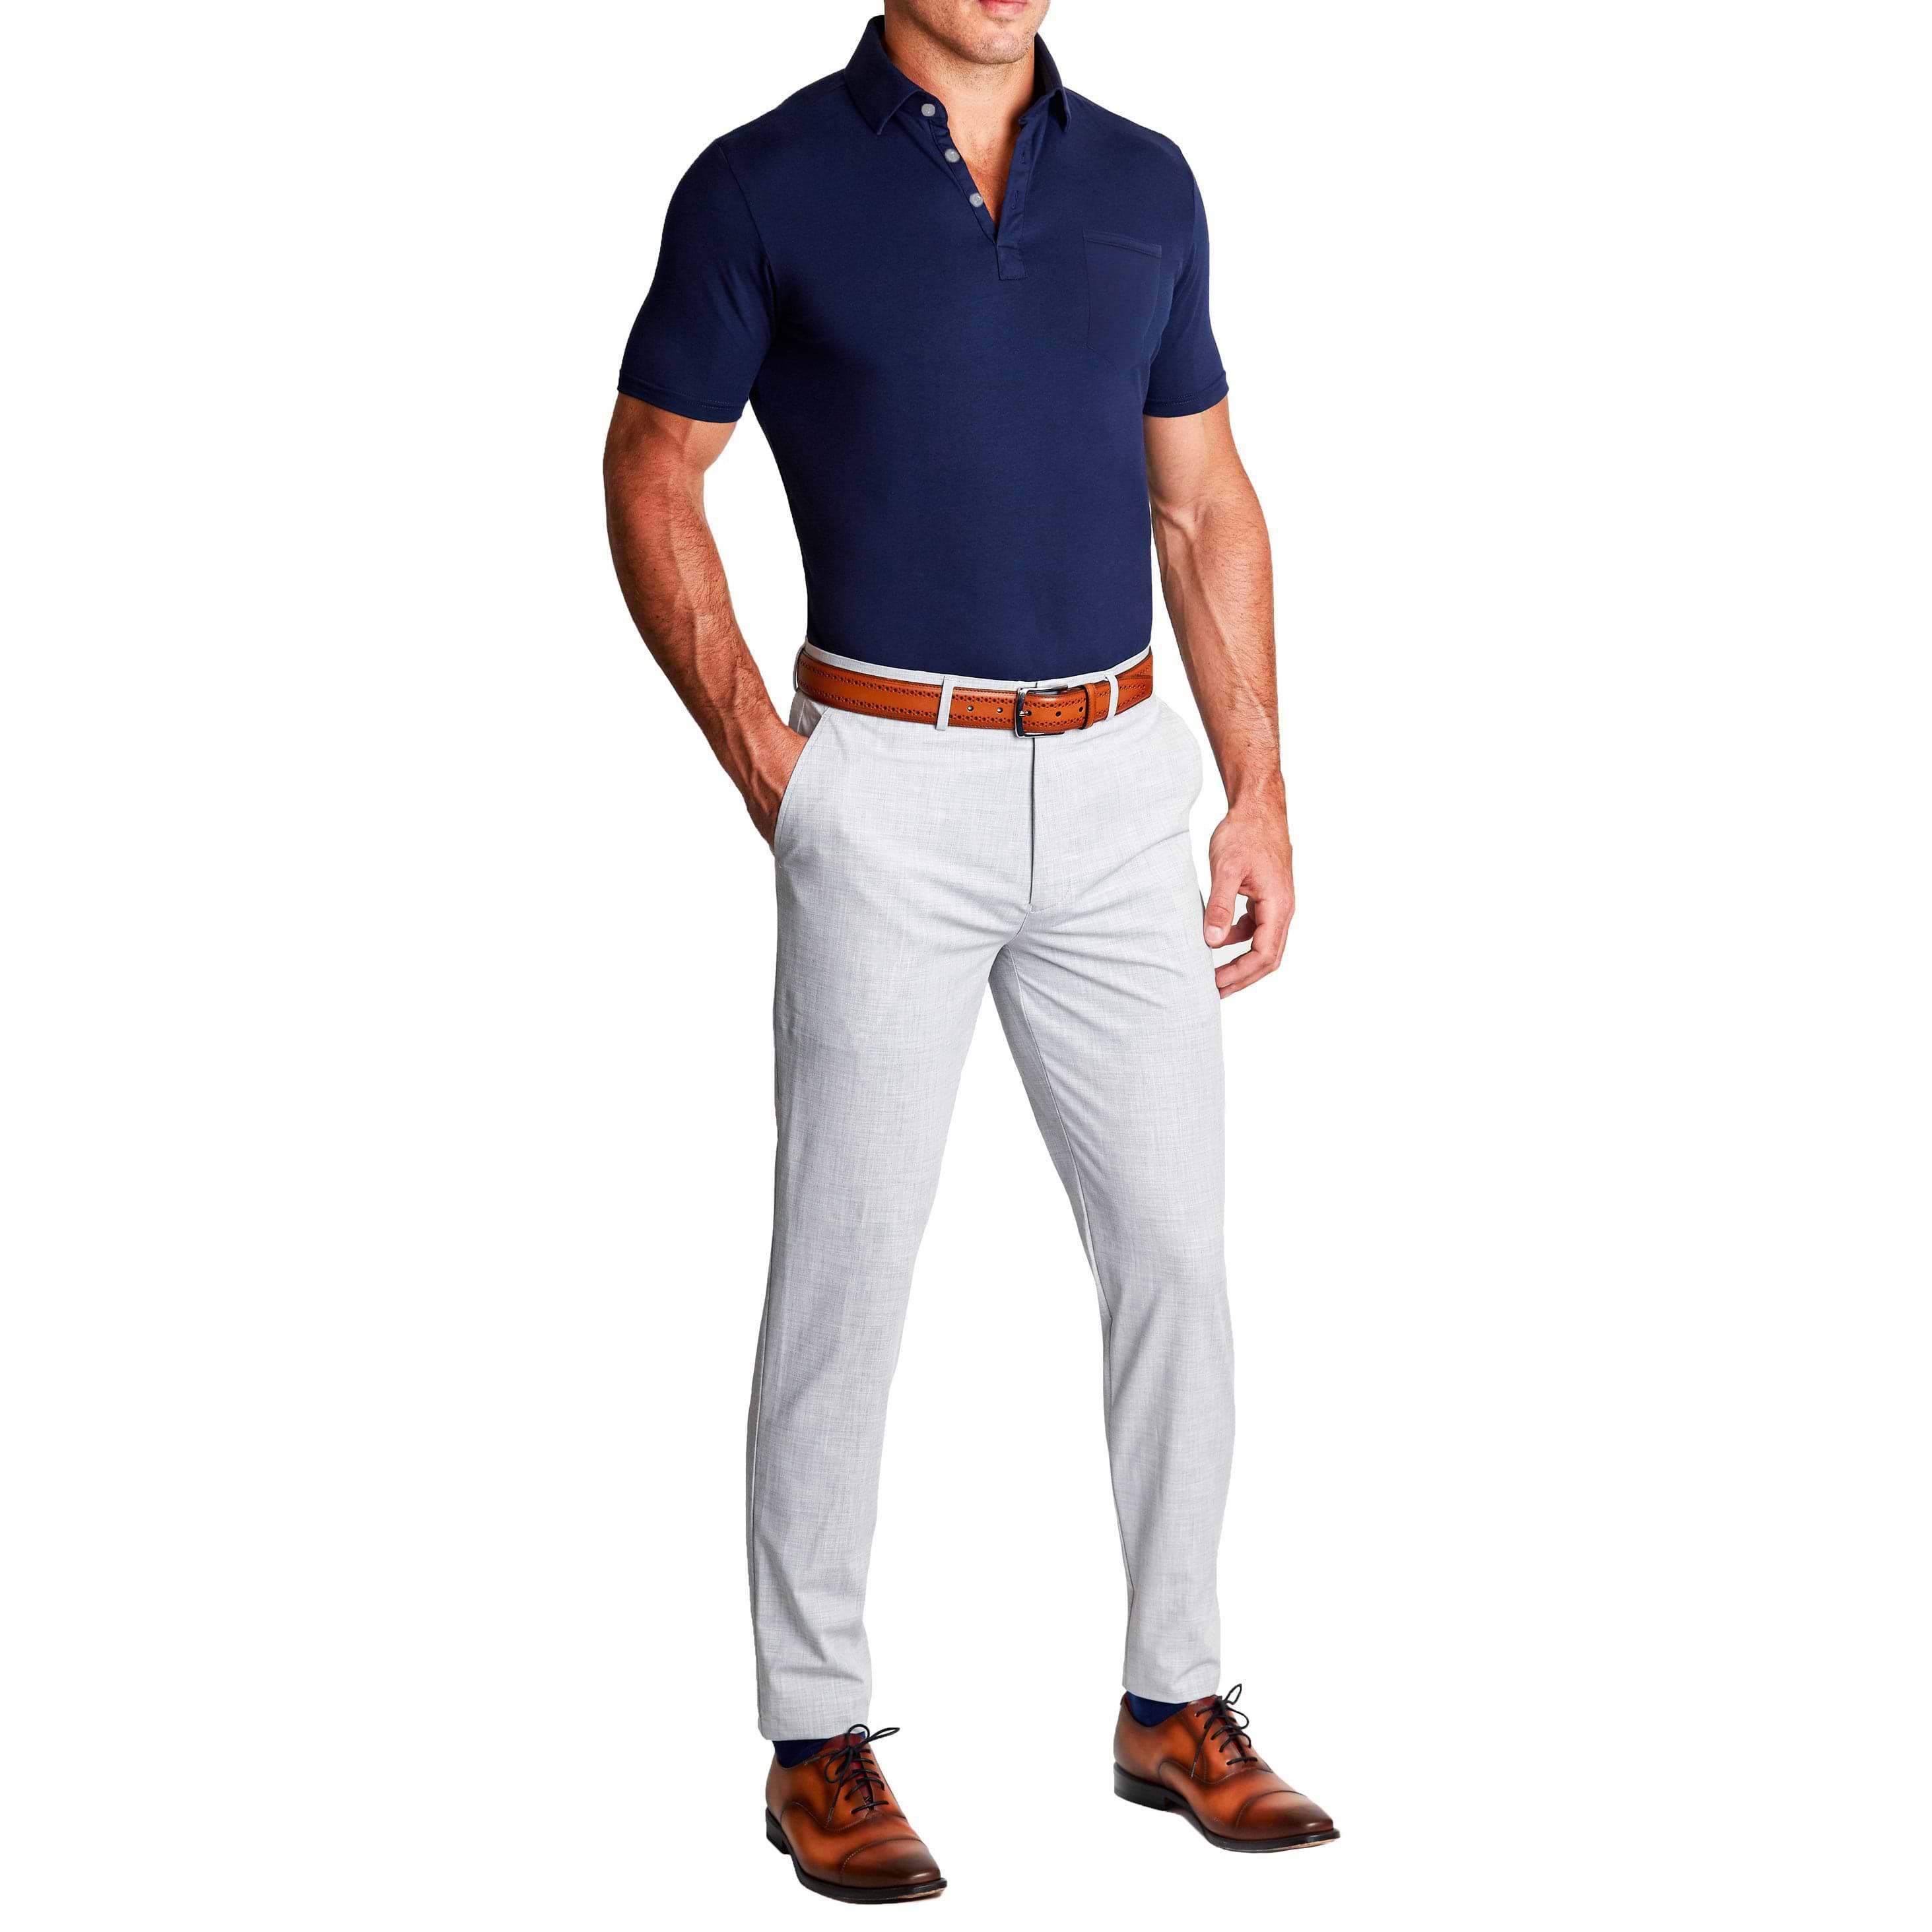 Buy Mens Formal & Casual Shirts Online in India | Great range